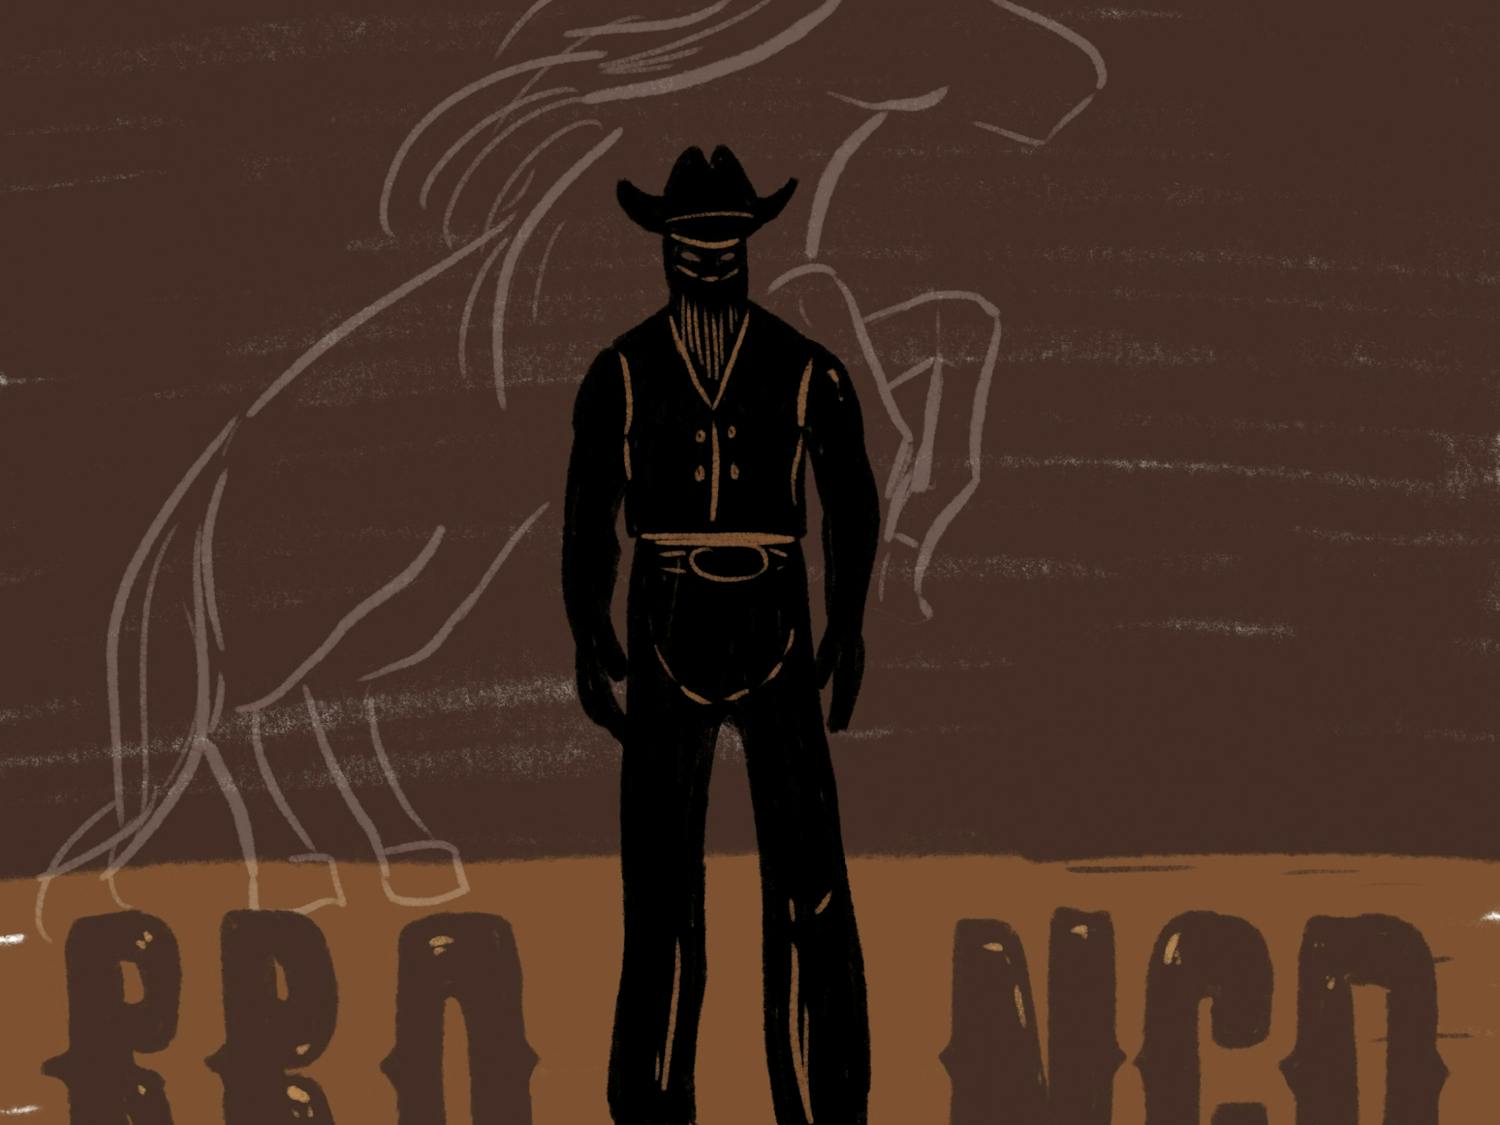 bronco music review